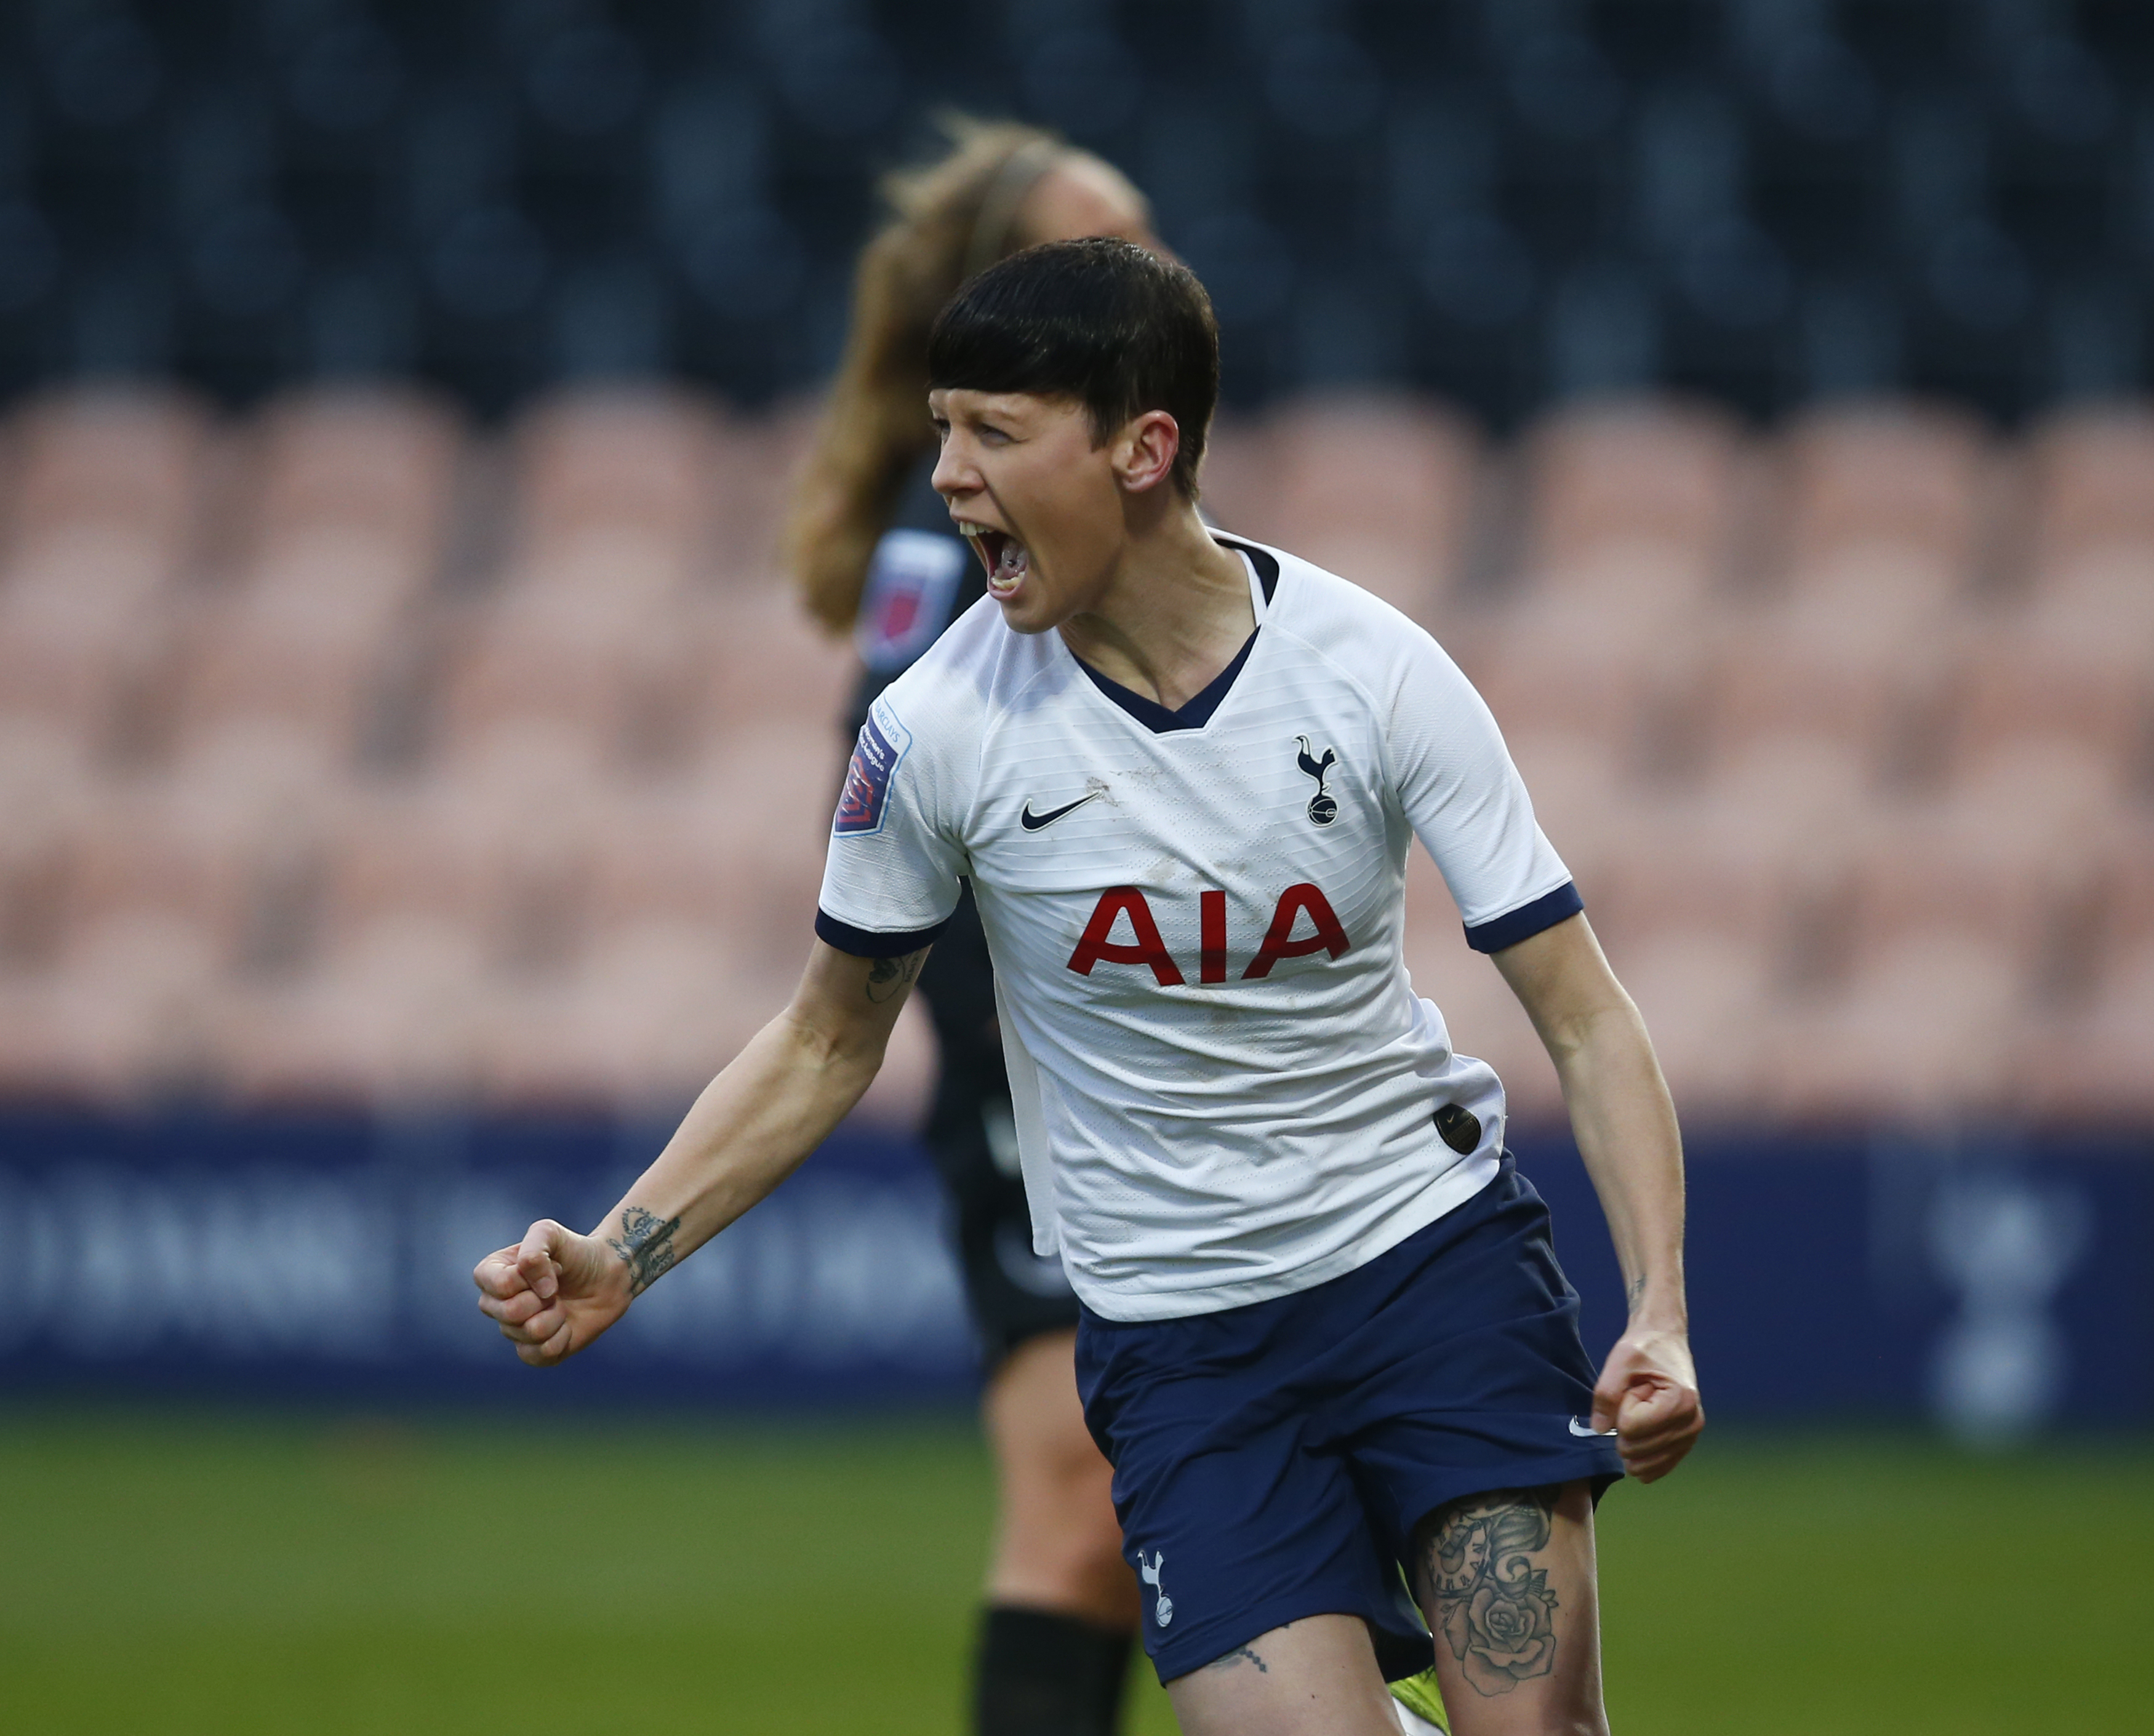 Ashleigh Neville nets new two-year contract with Spurs Women - SheKicks